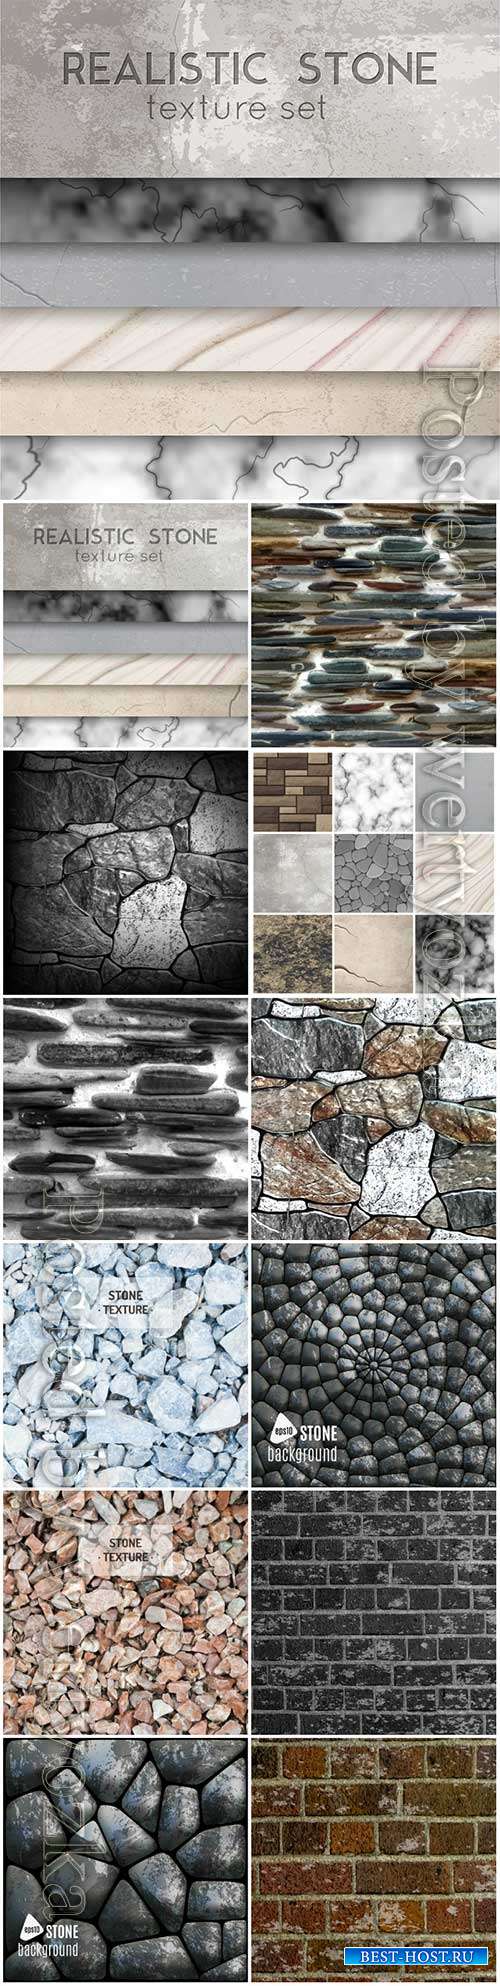 Realistic stone texture patterns collection